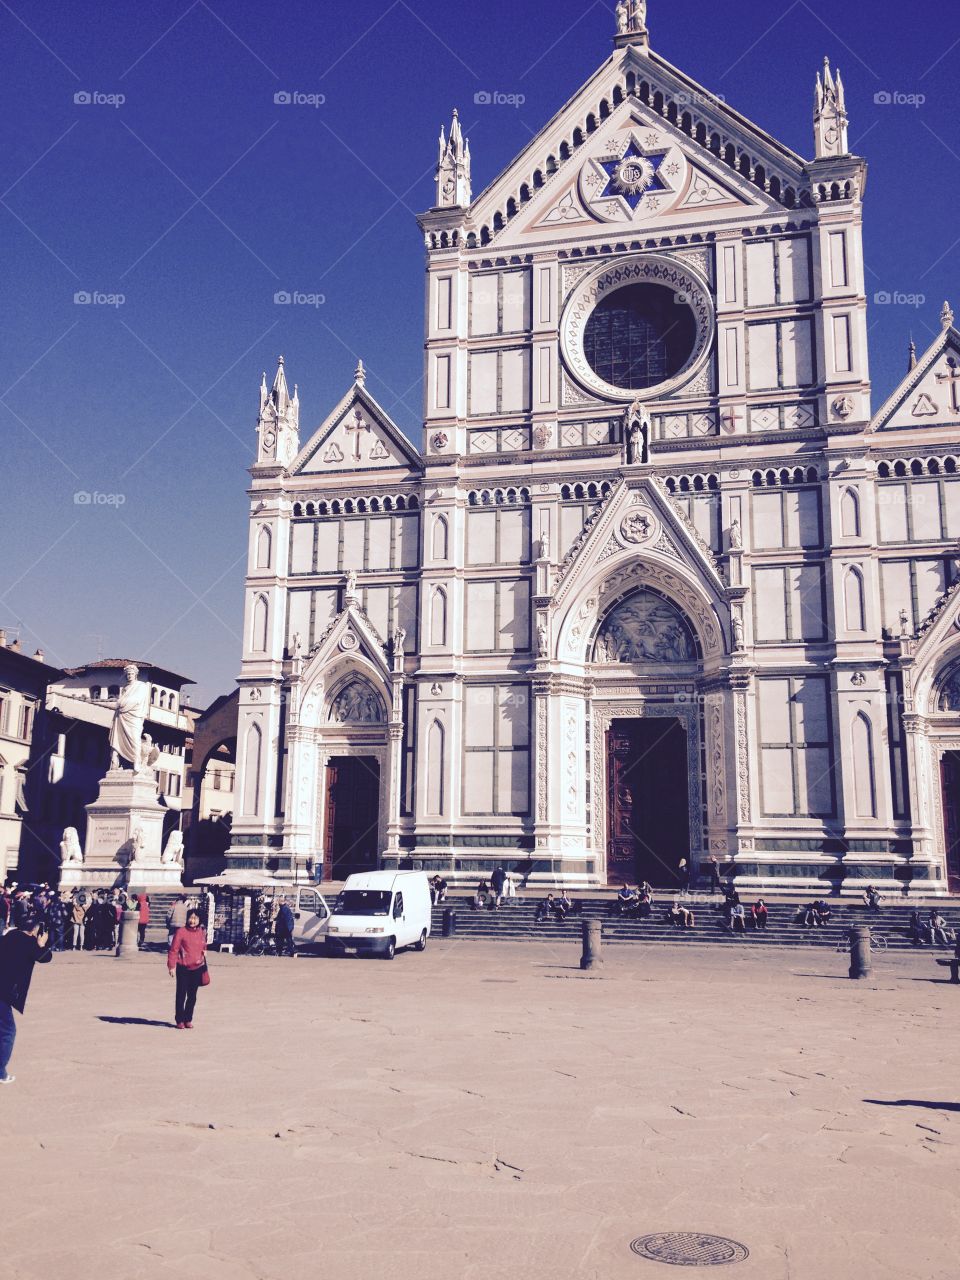 Santa Croce church in Florence, Italy 